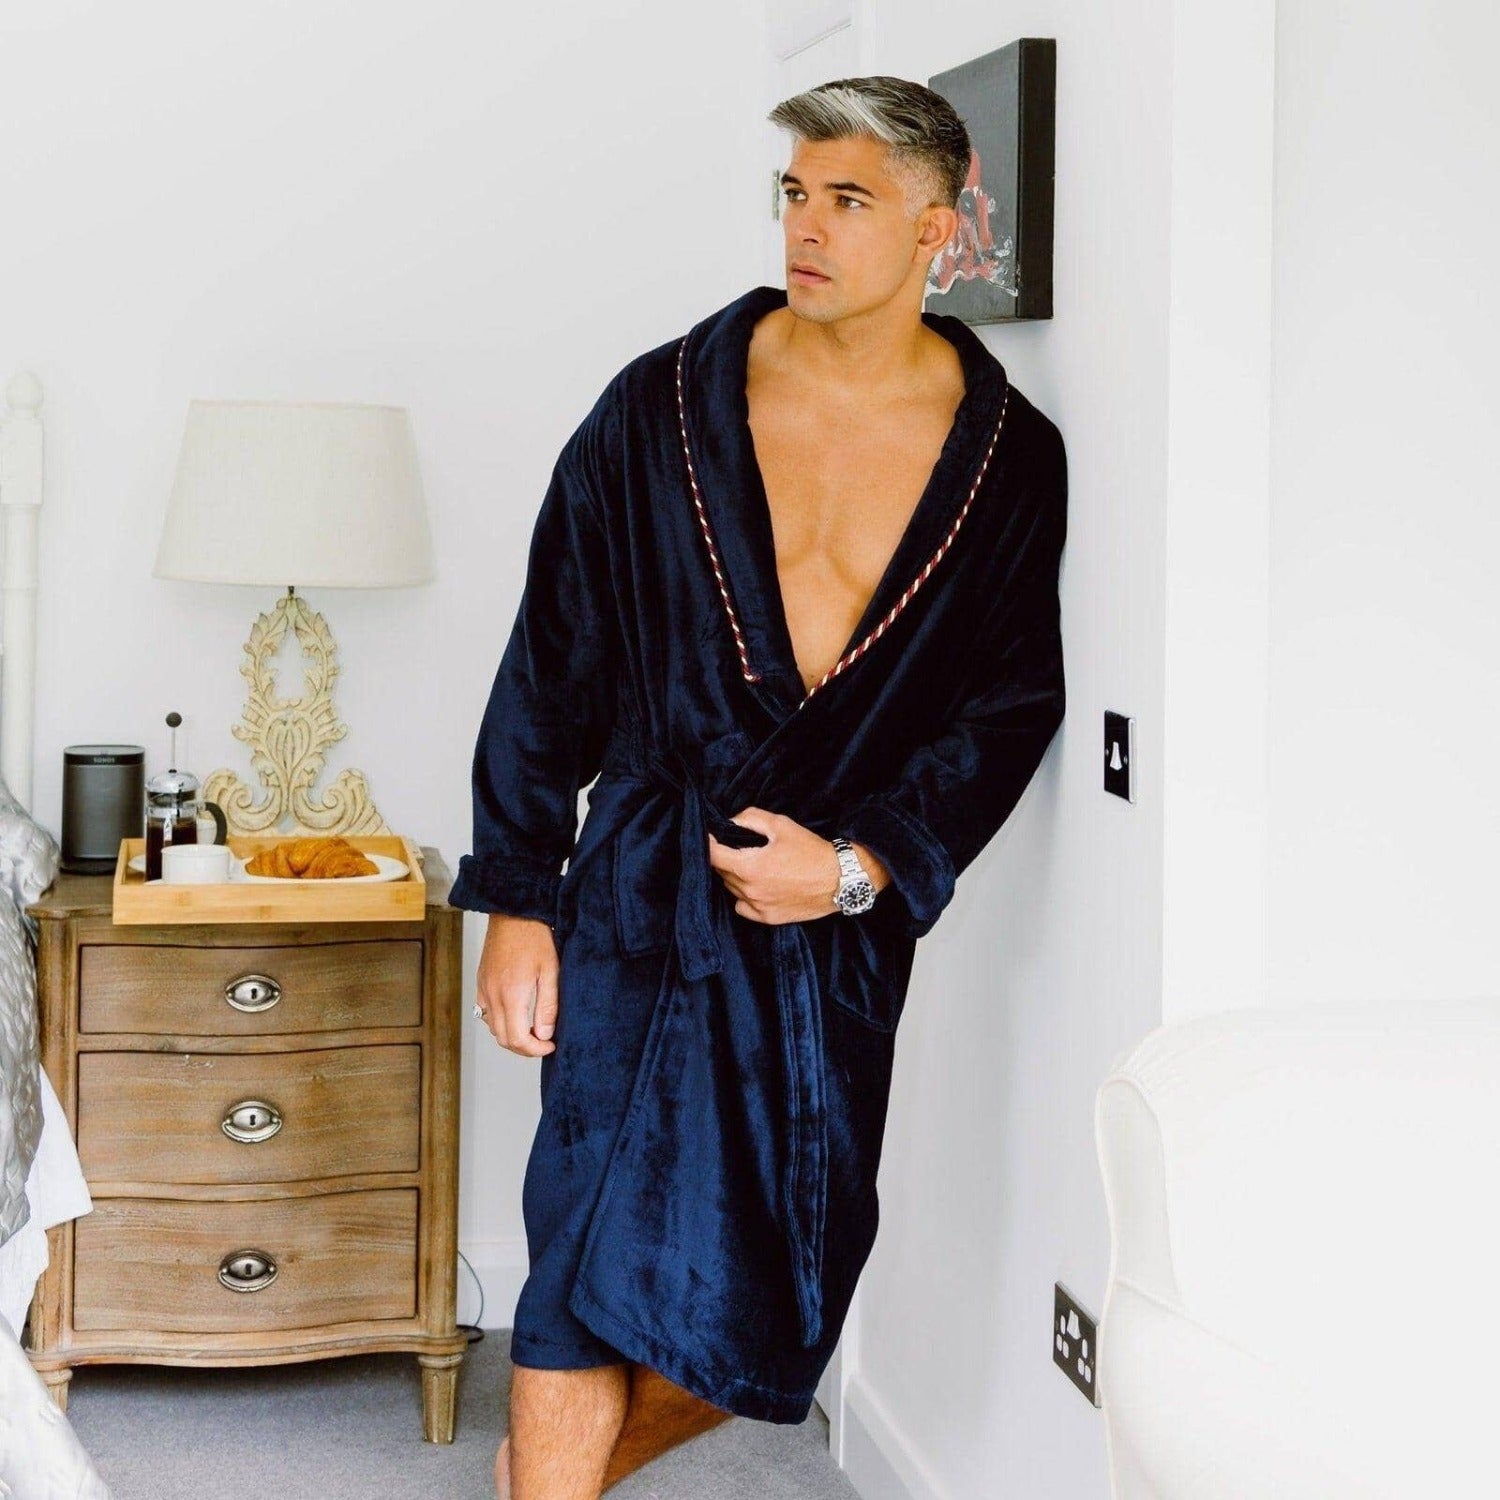 Personalized Robes for Men - Make Your Own Robes